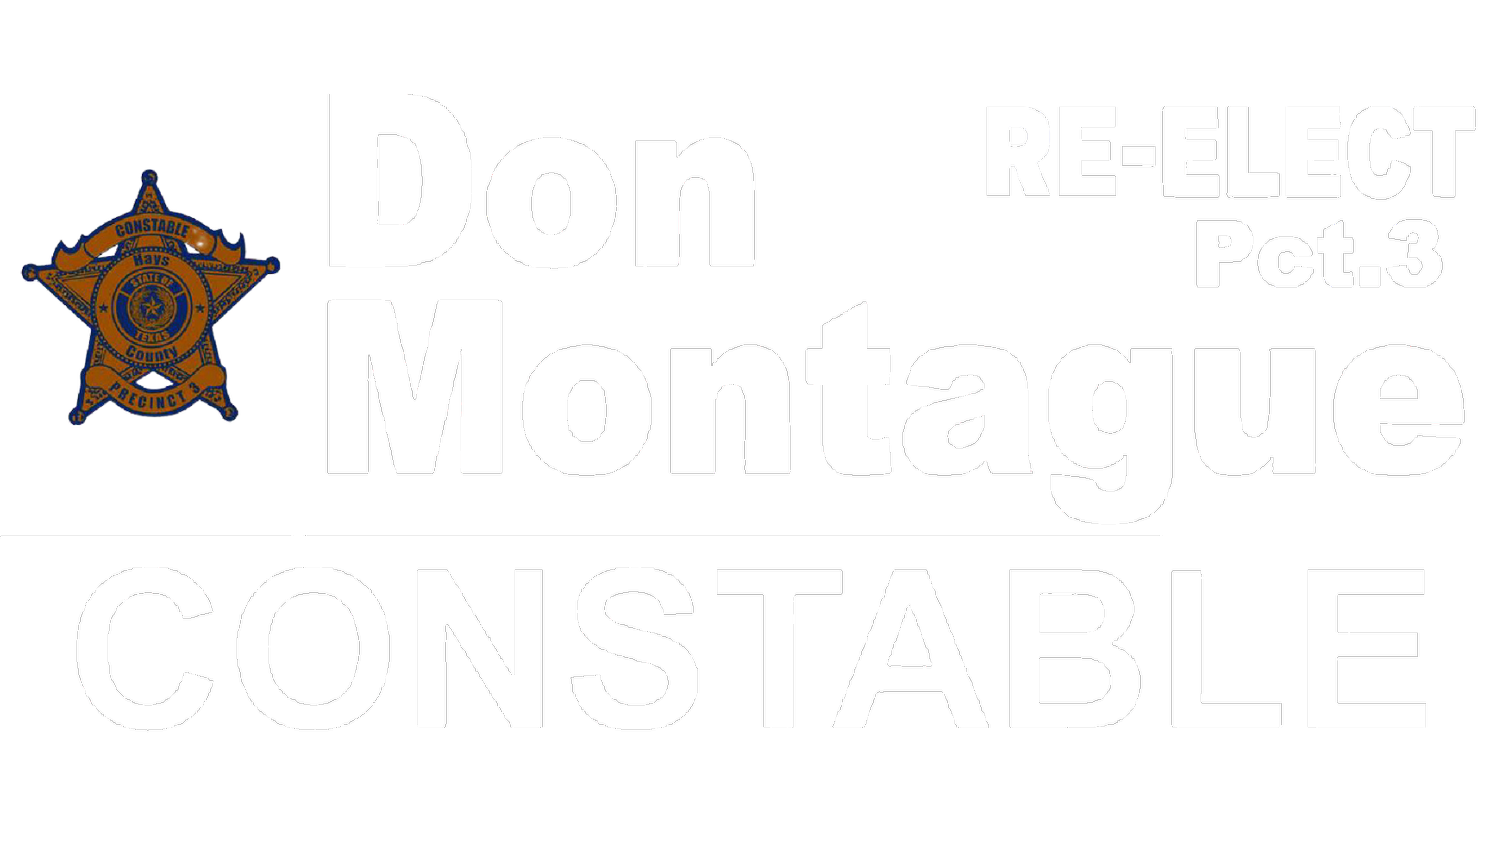 Don Montague for Constable